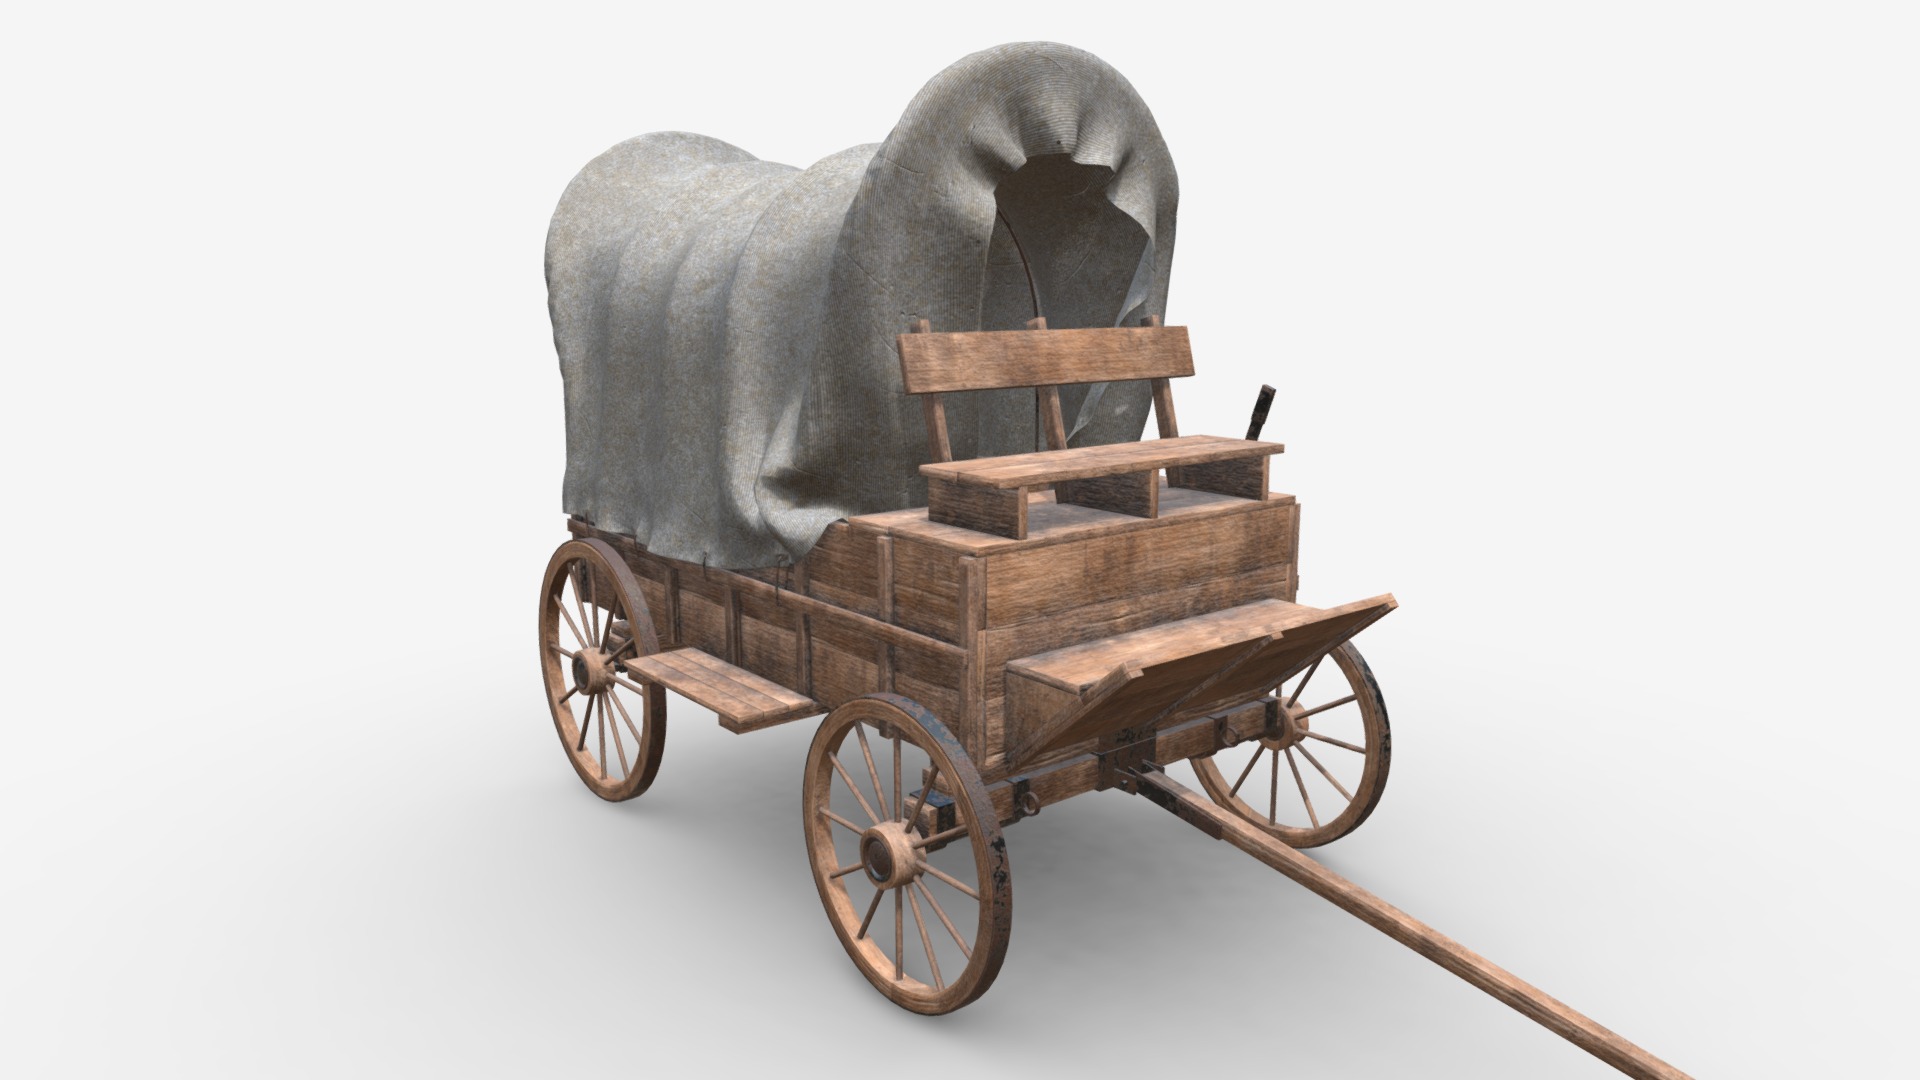 3D model Wagon wooden covered - This is a 3D model of the Wagon wooden covered. The 3D model is about a wooden carriage with wheels.